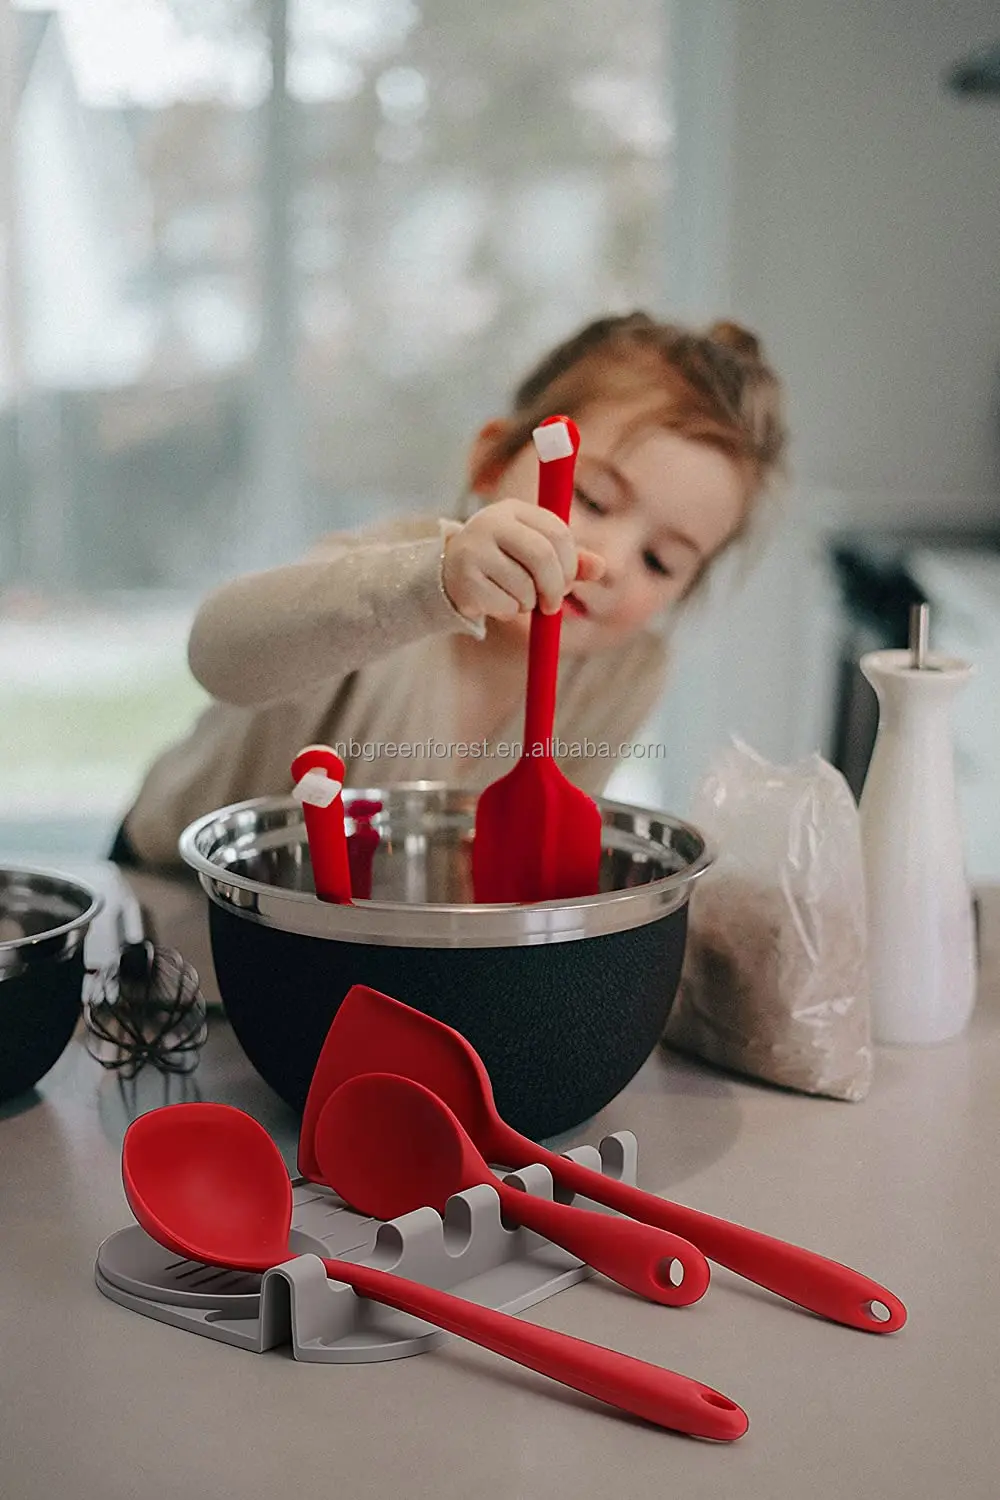 Silicone Spoon Rest With Drip Pad For Multiple Utensils.silicone Utensil  Rest 6 In 1 Larger Size Silicone Spoon Holder For Stove  Top,bpa-free,heat-res